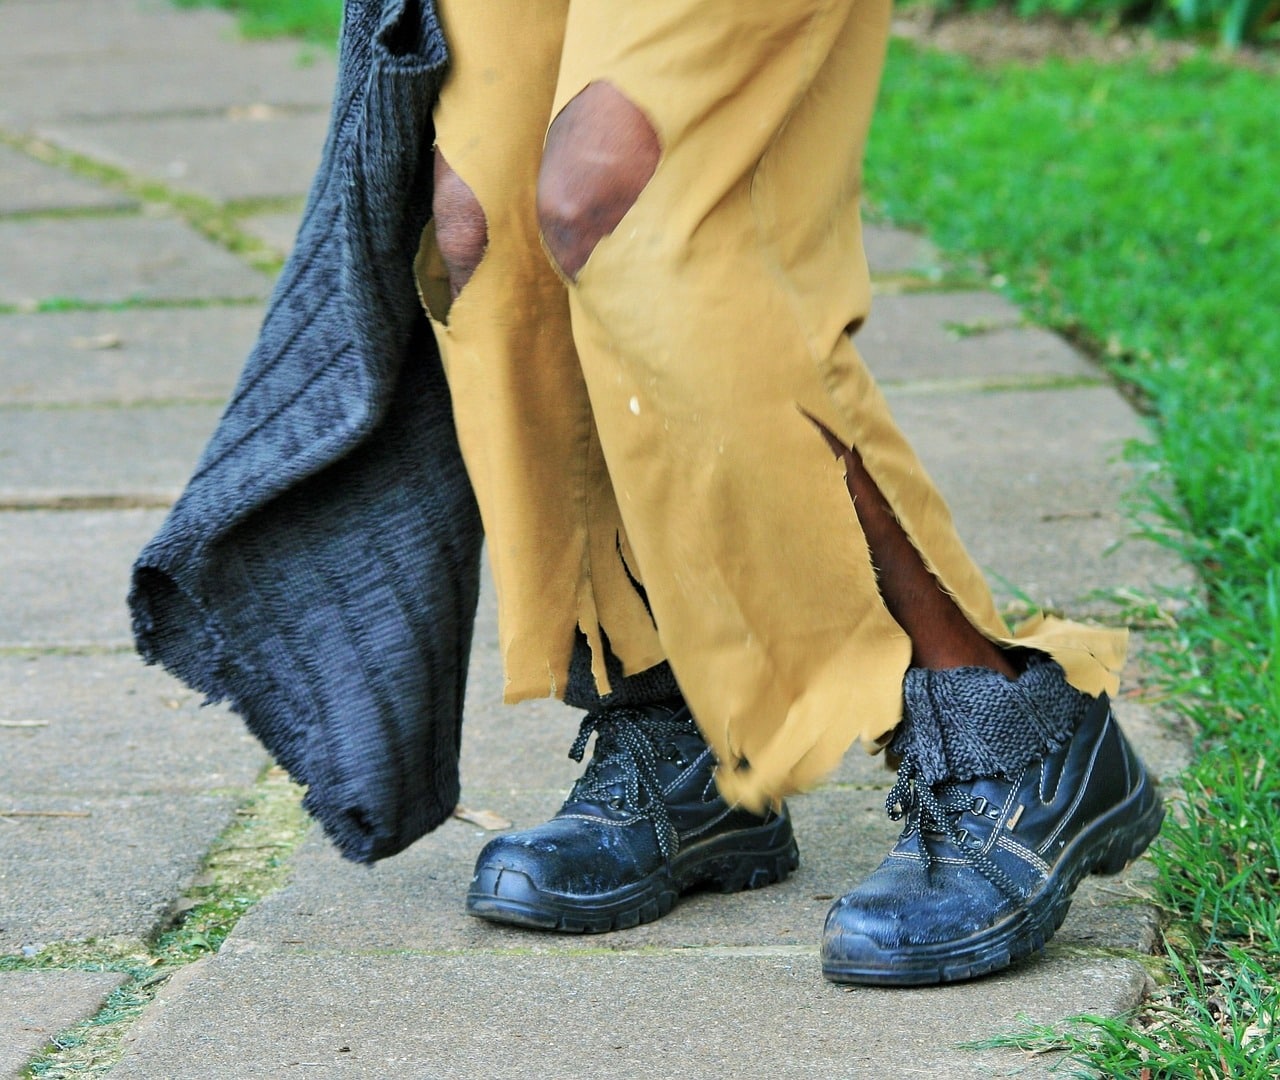 homeless with torn yellow pants